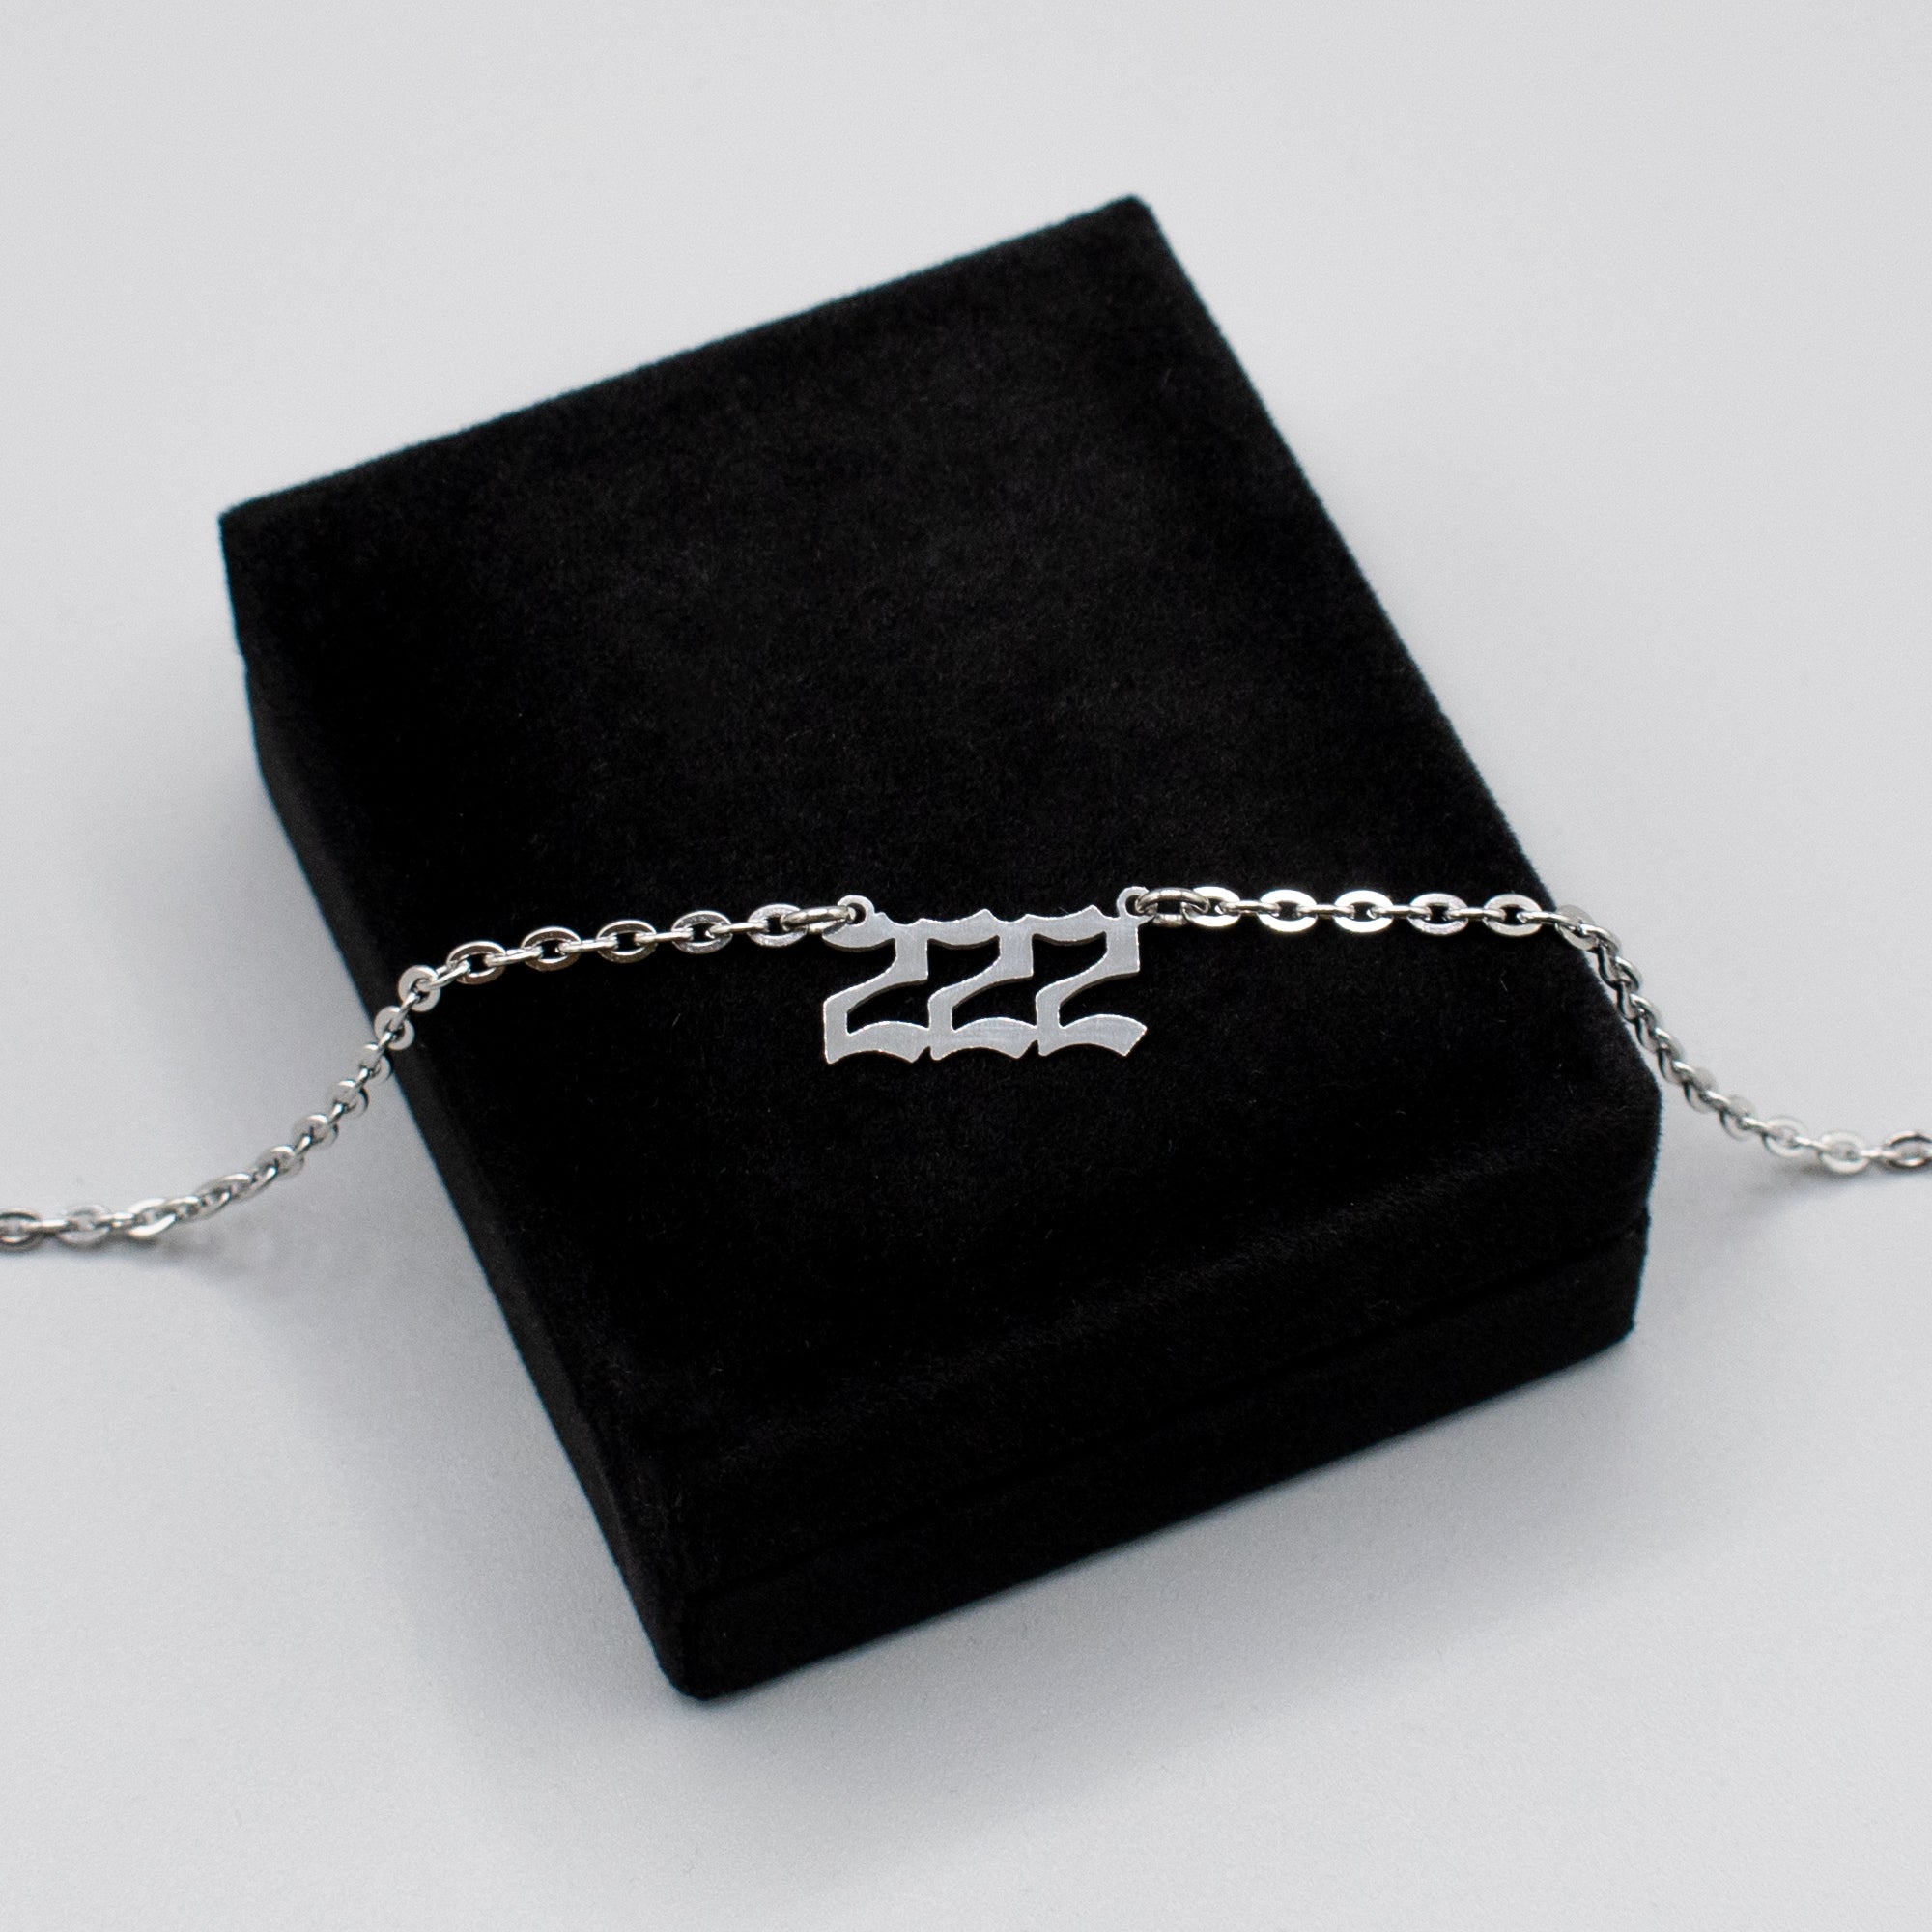 222 Angel Number Choker Necklace (Silver)